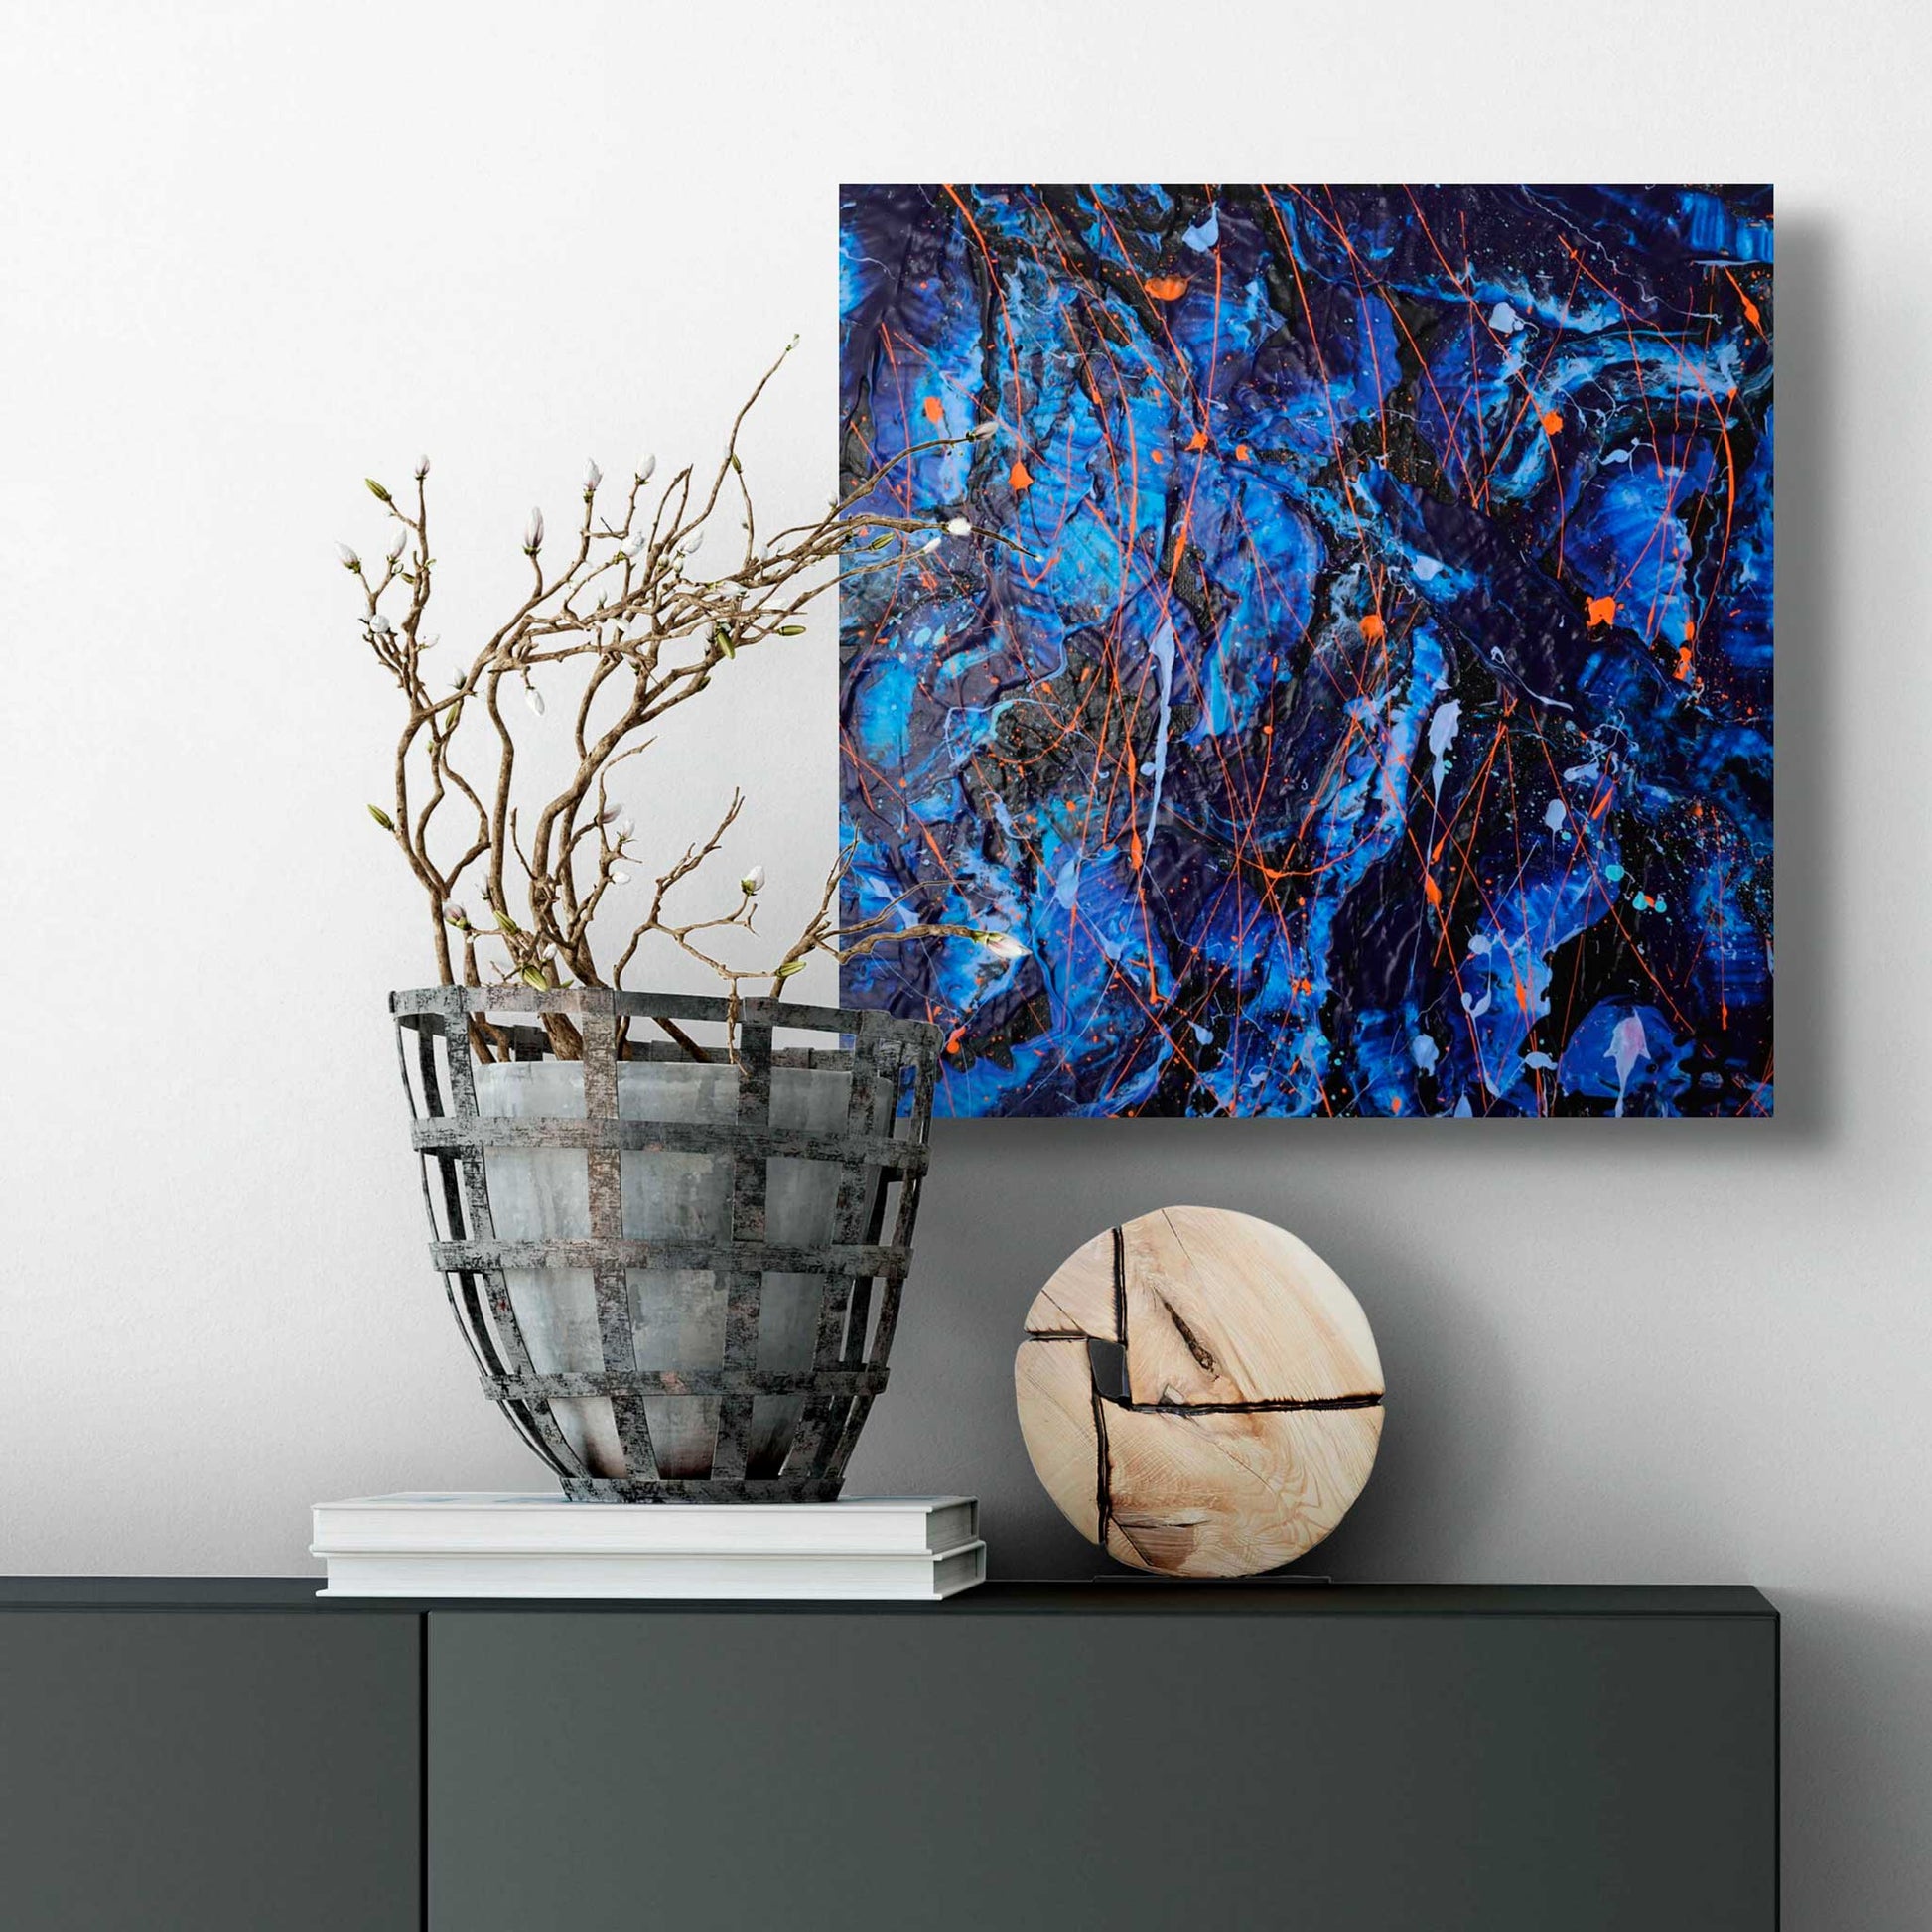 Enigma, hand painted abstract art in blues and blacks with neon orange marks. Acrlic on canvas heavy texture abstract. Painted by Bridget Bradley, a Commissioned artwork.